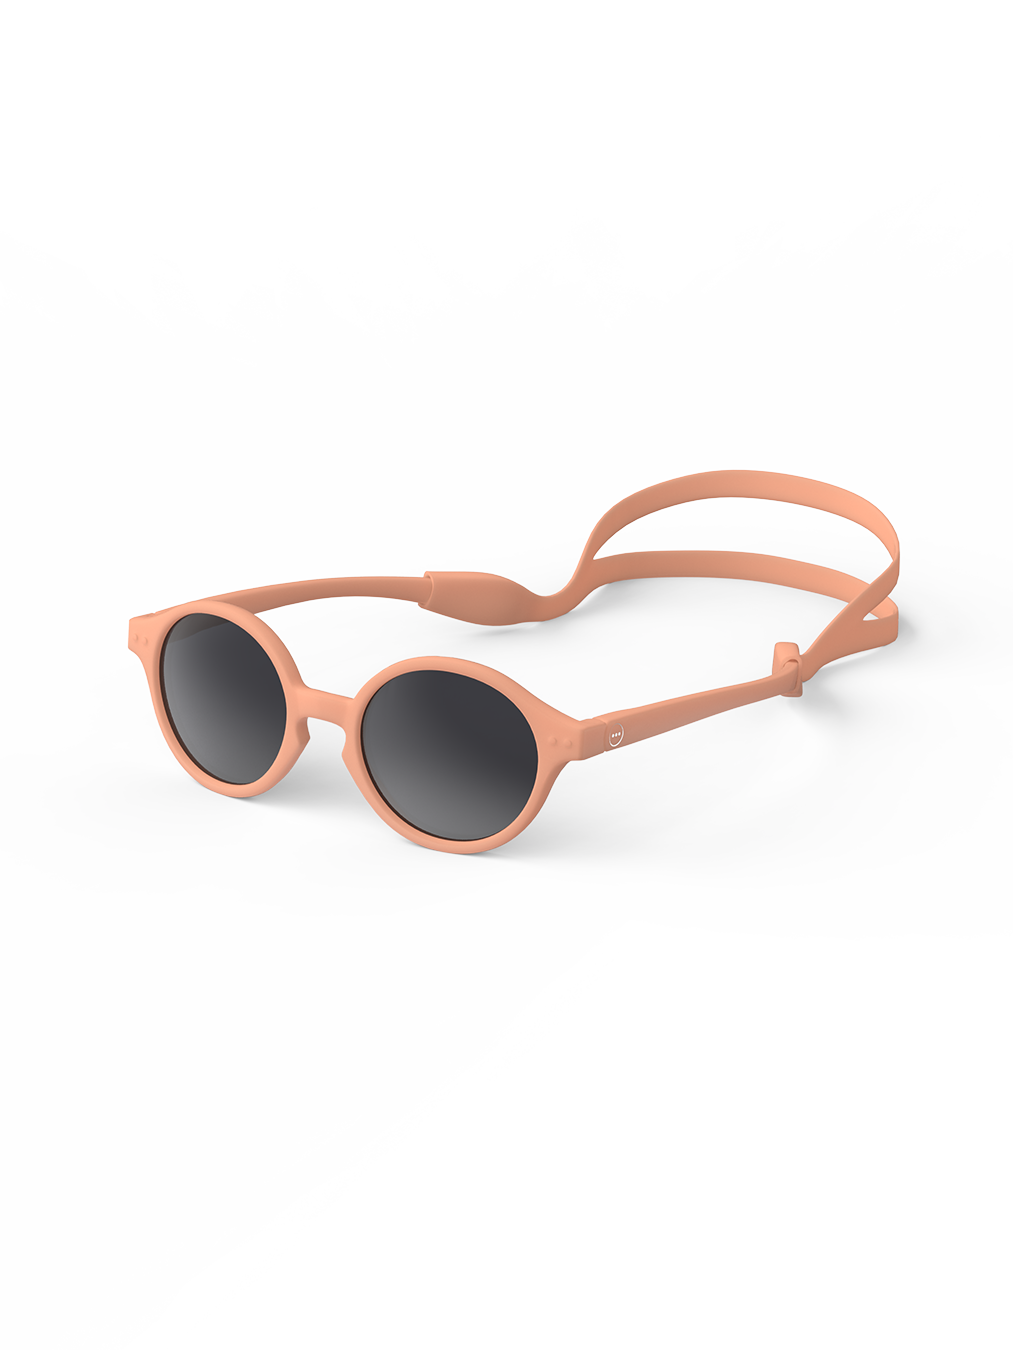 Apricot Toddler Sunglasses